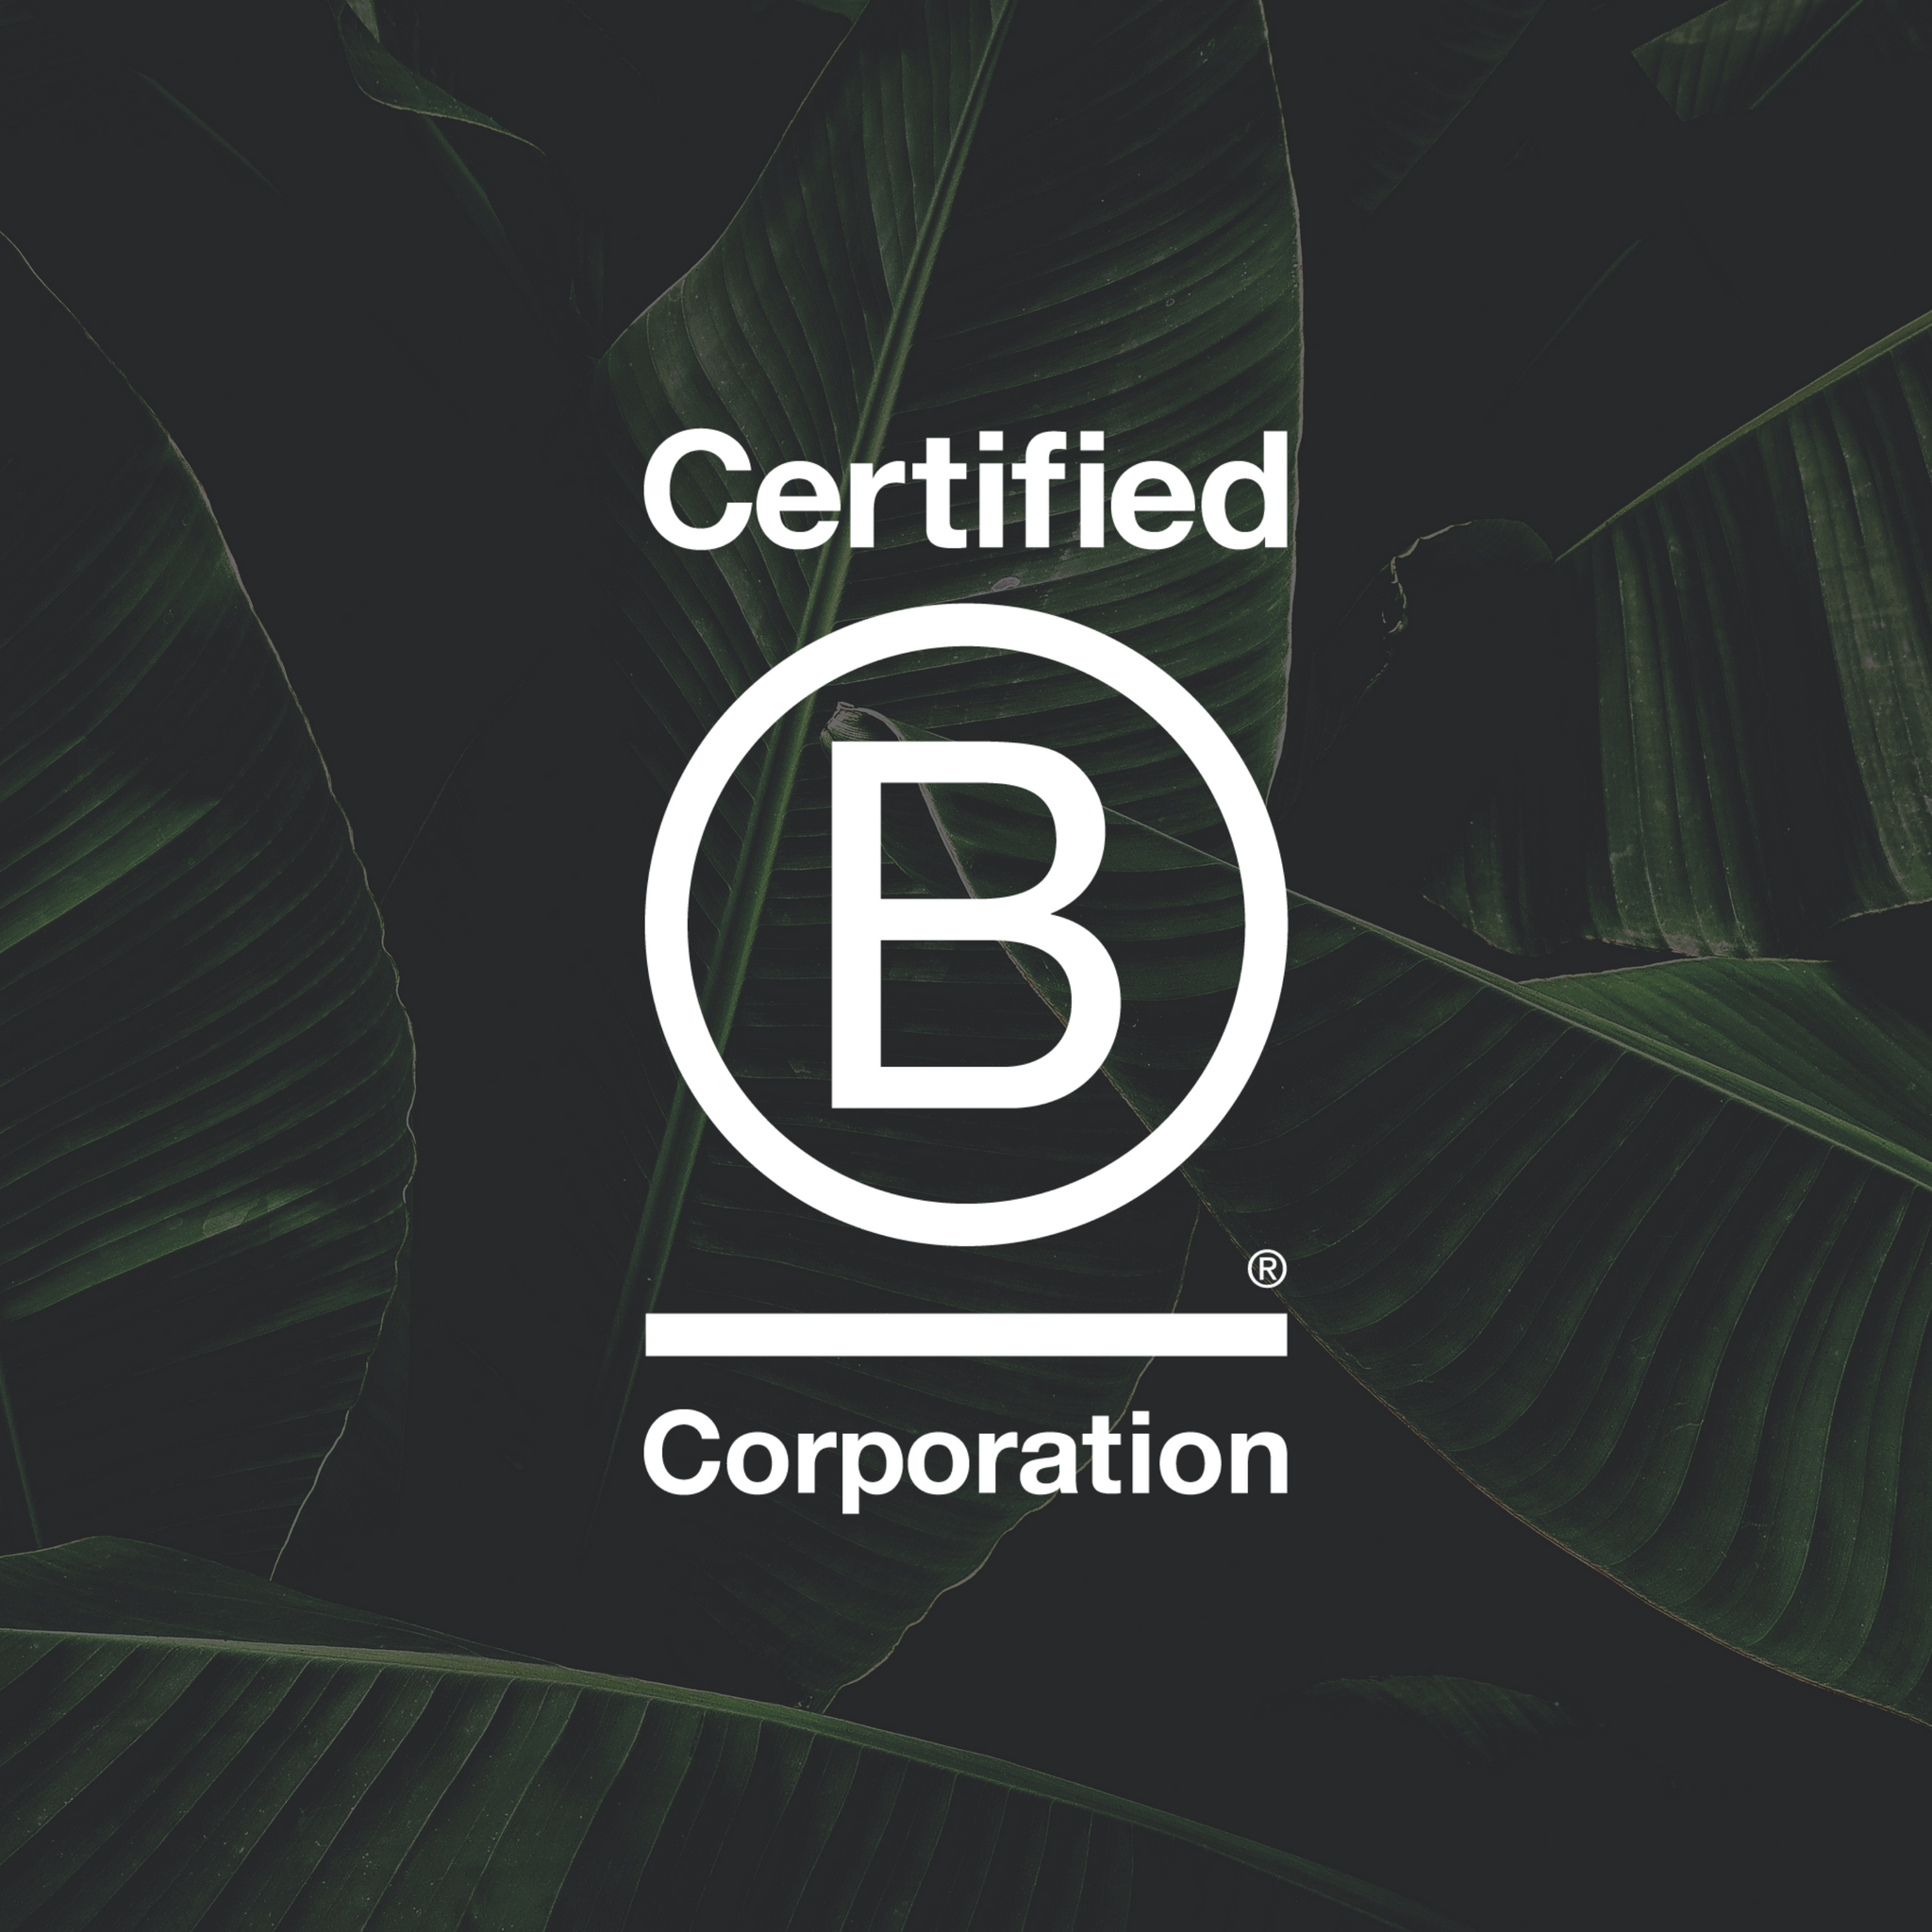 We're proudly a B Corporation.